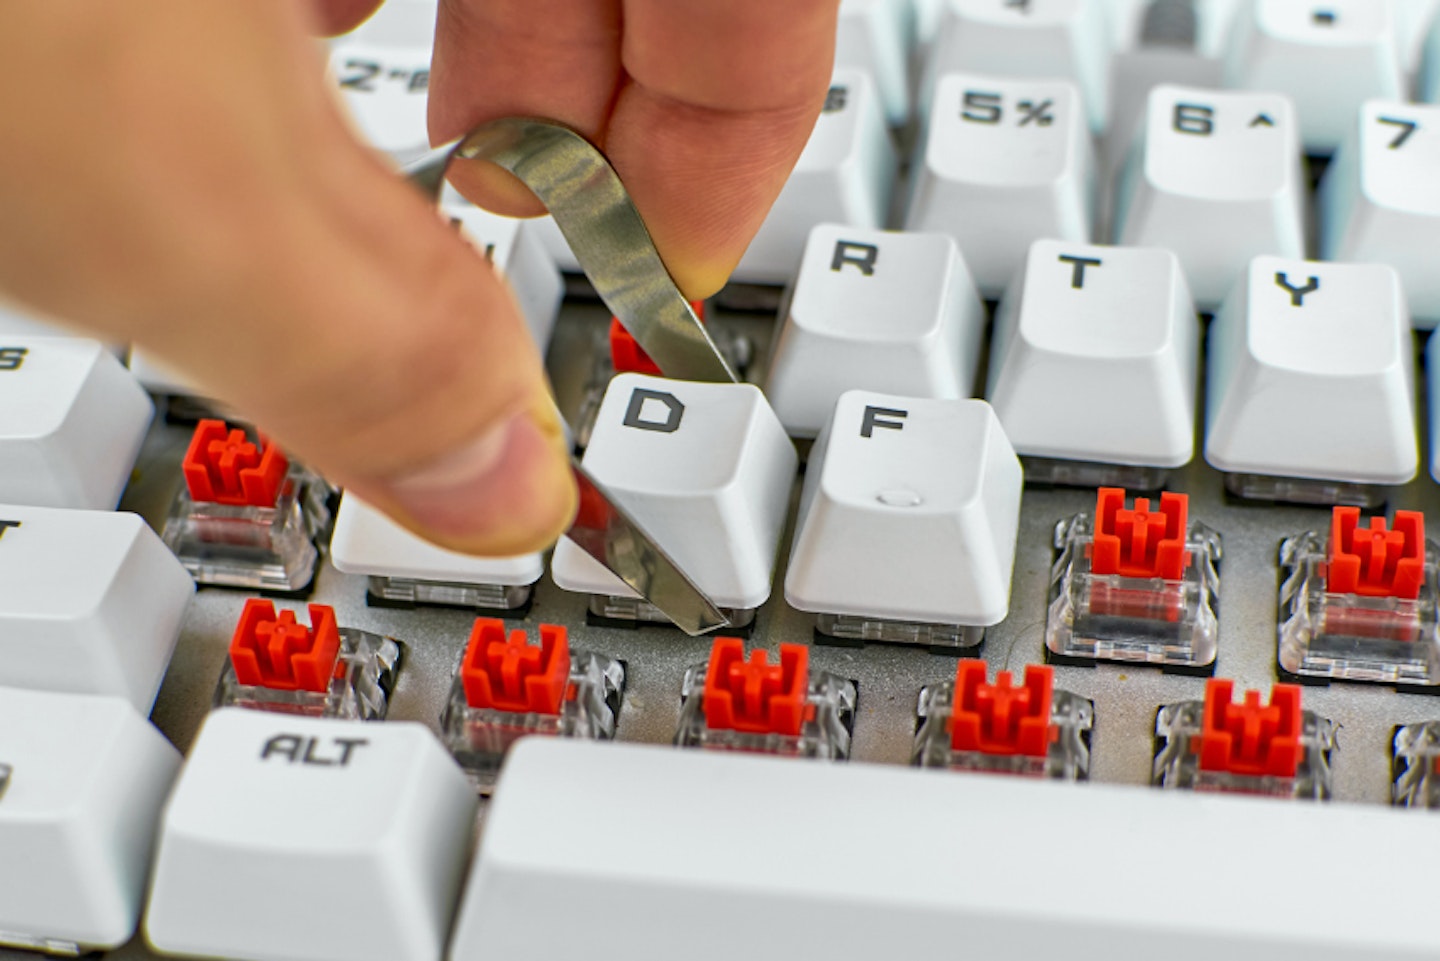 MECHANICAL KEYBOARD SWITCHES AND KEYCAPS BEING REMOVED